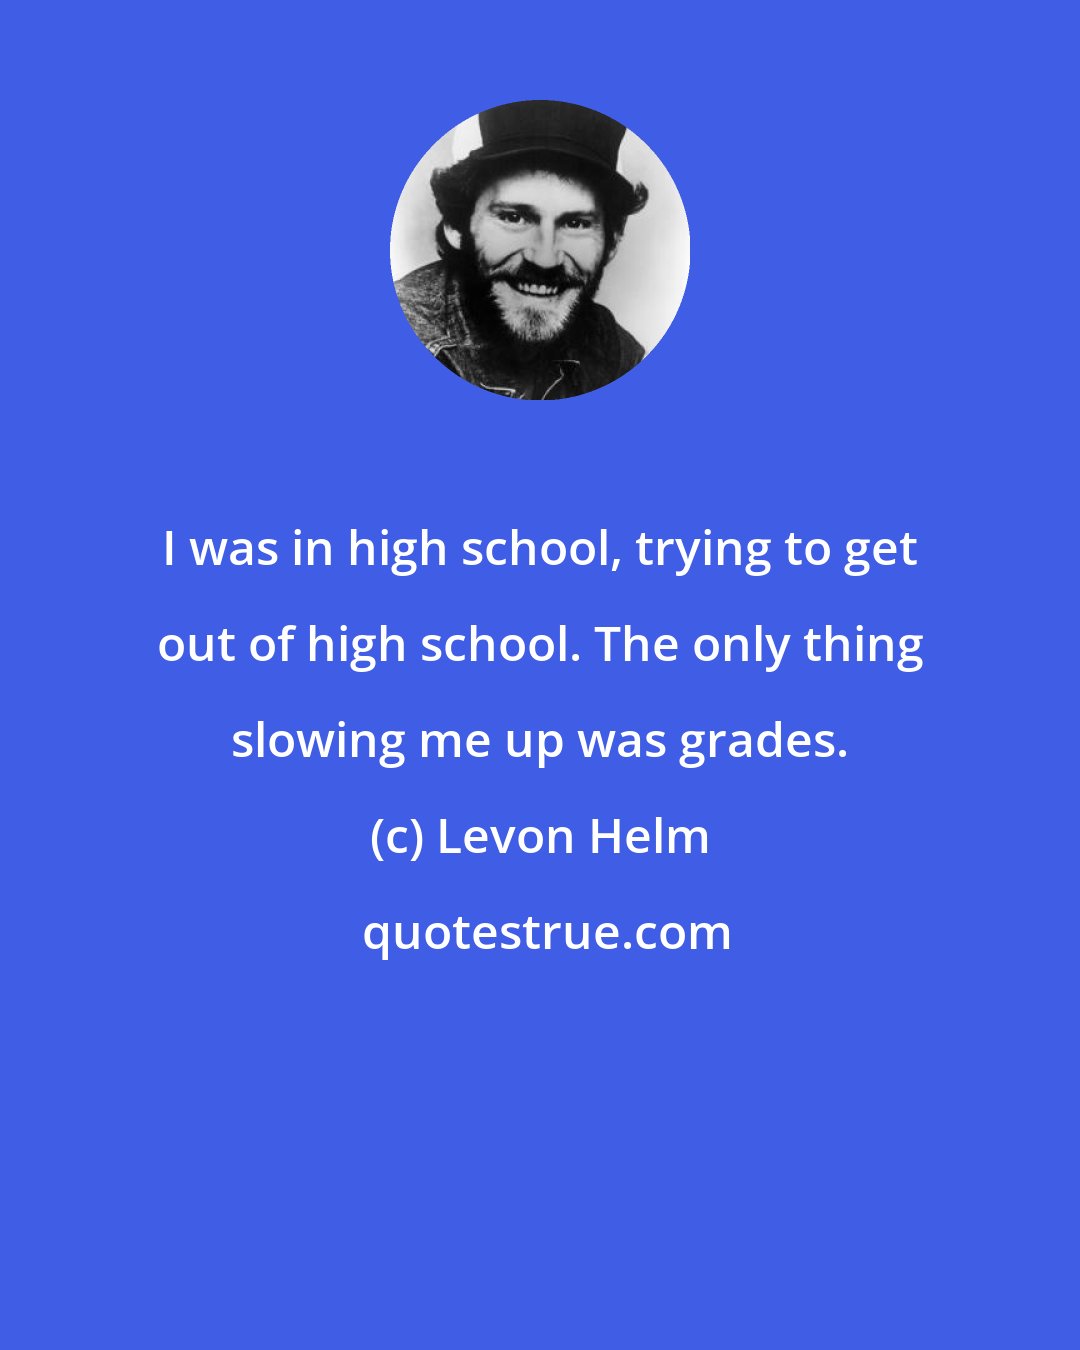 Levon Helm: I was in high school, trying to get out of high school. The only thing slowing me up was grades.